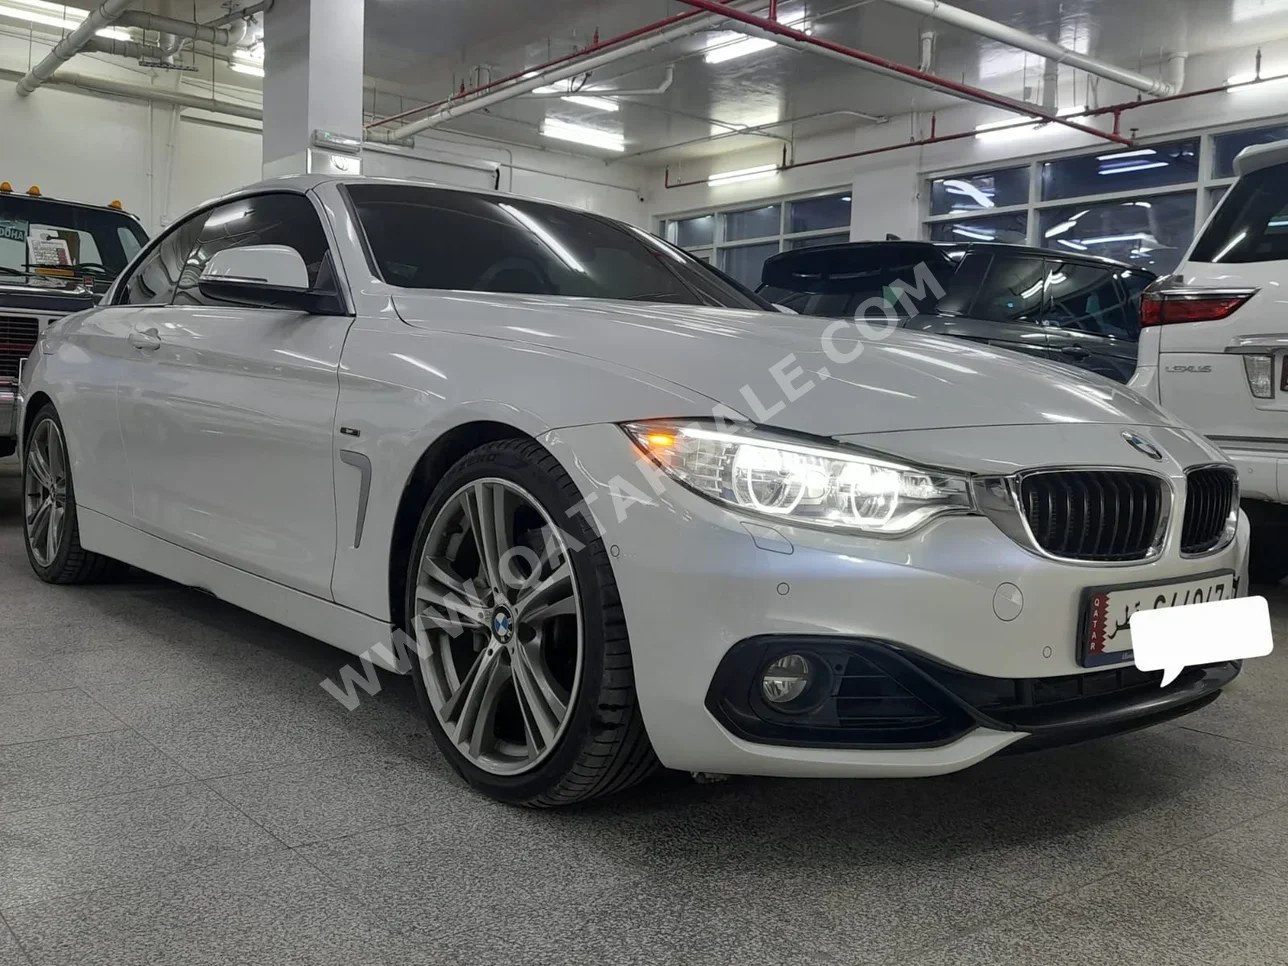 BMW  4-Series  435 I  2014  Automatic  33,000 Km  6 Cylinder  Rear Wheel Drive (RWD)  Convertible  White